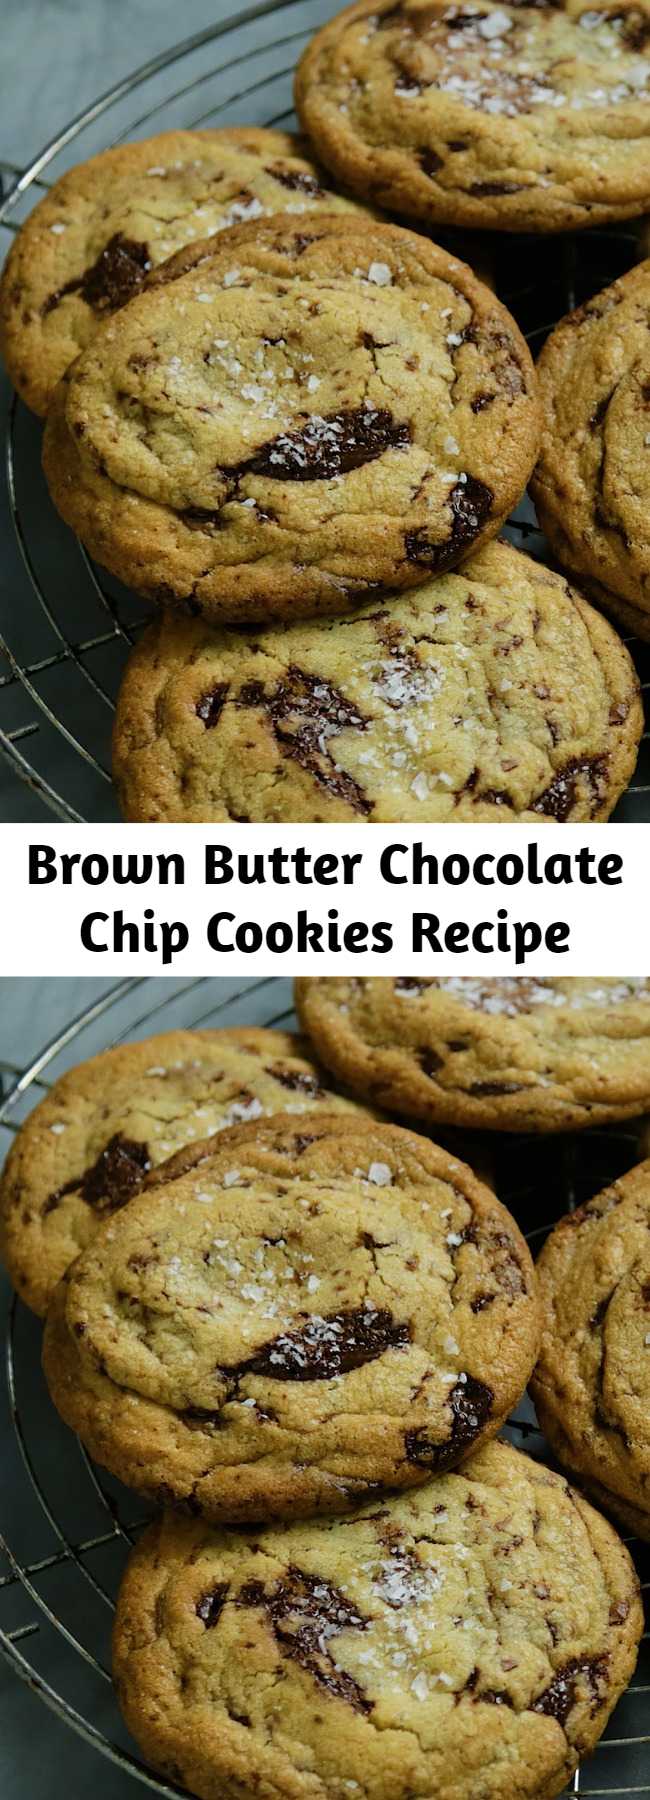 Brown Butter Chocolate Chip Cookies Recipe - Your new go-to chocolate chip cookie recipe.